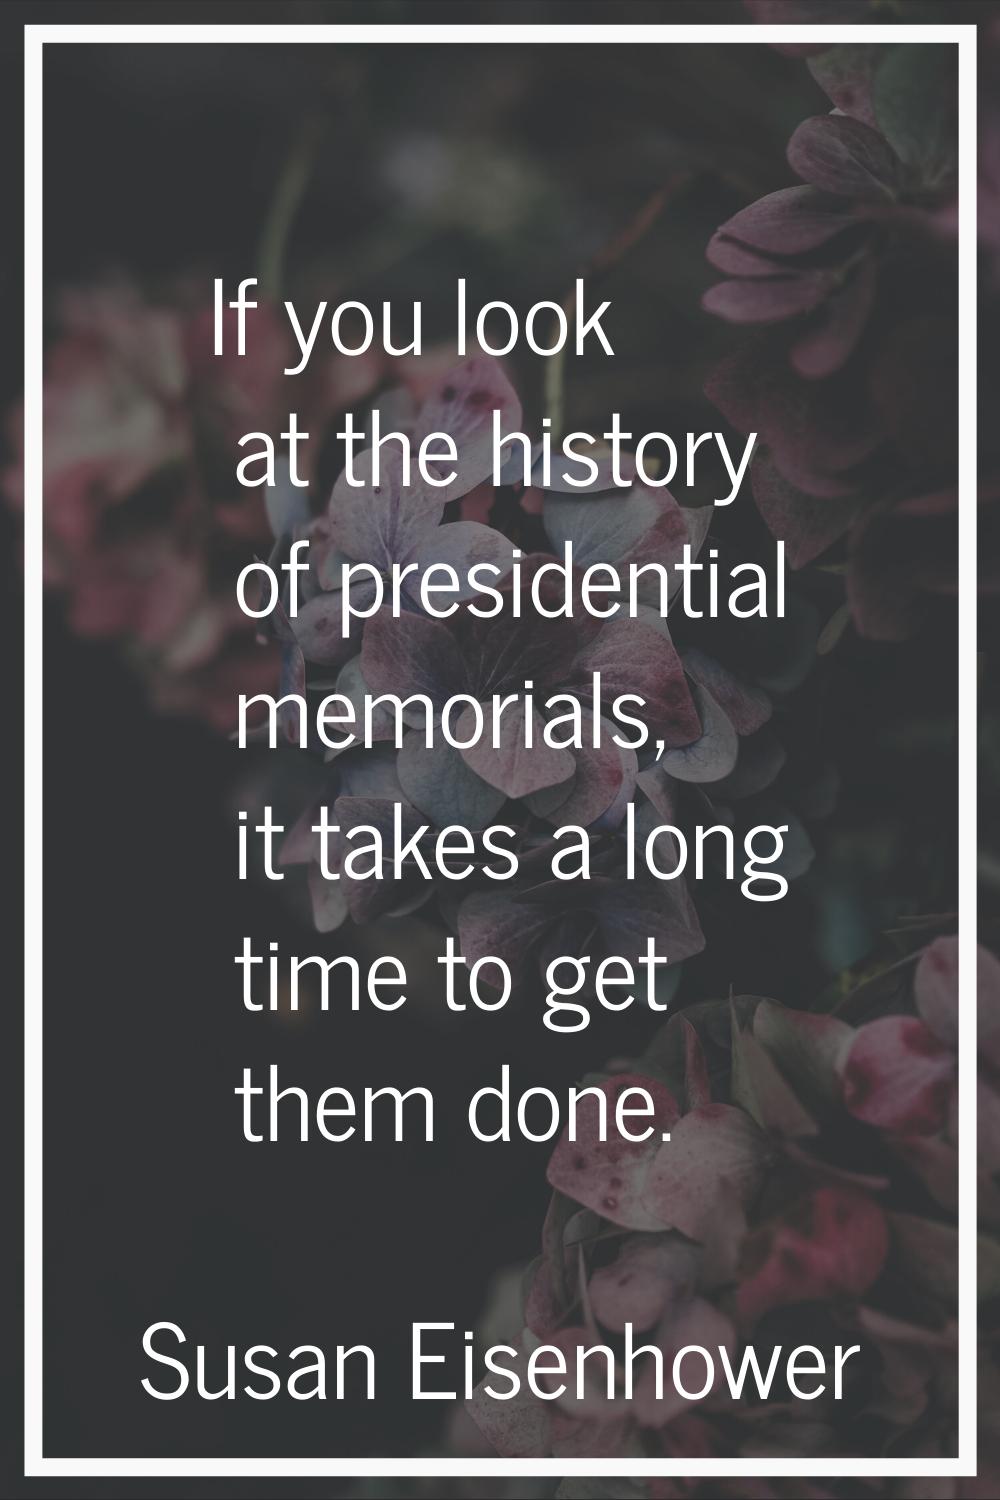 If you look at the history of presidential memorials, it takes a long time to get them done.